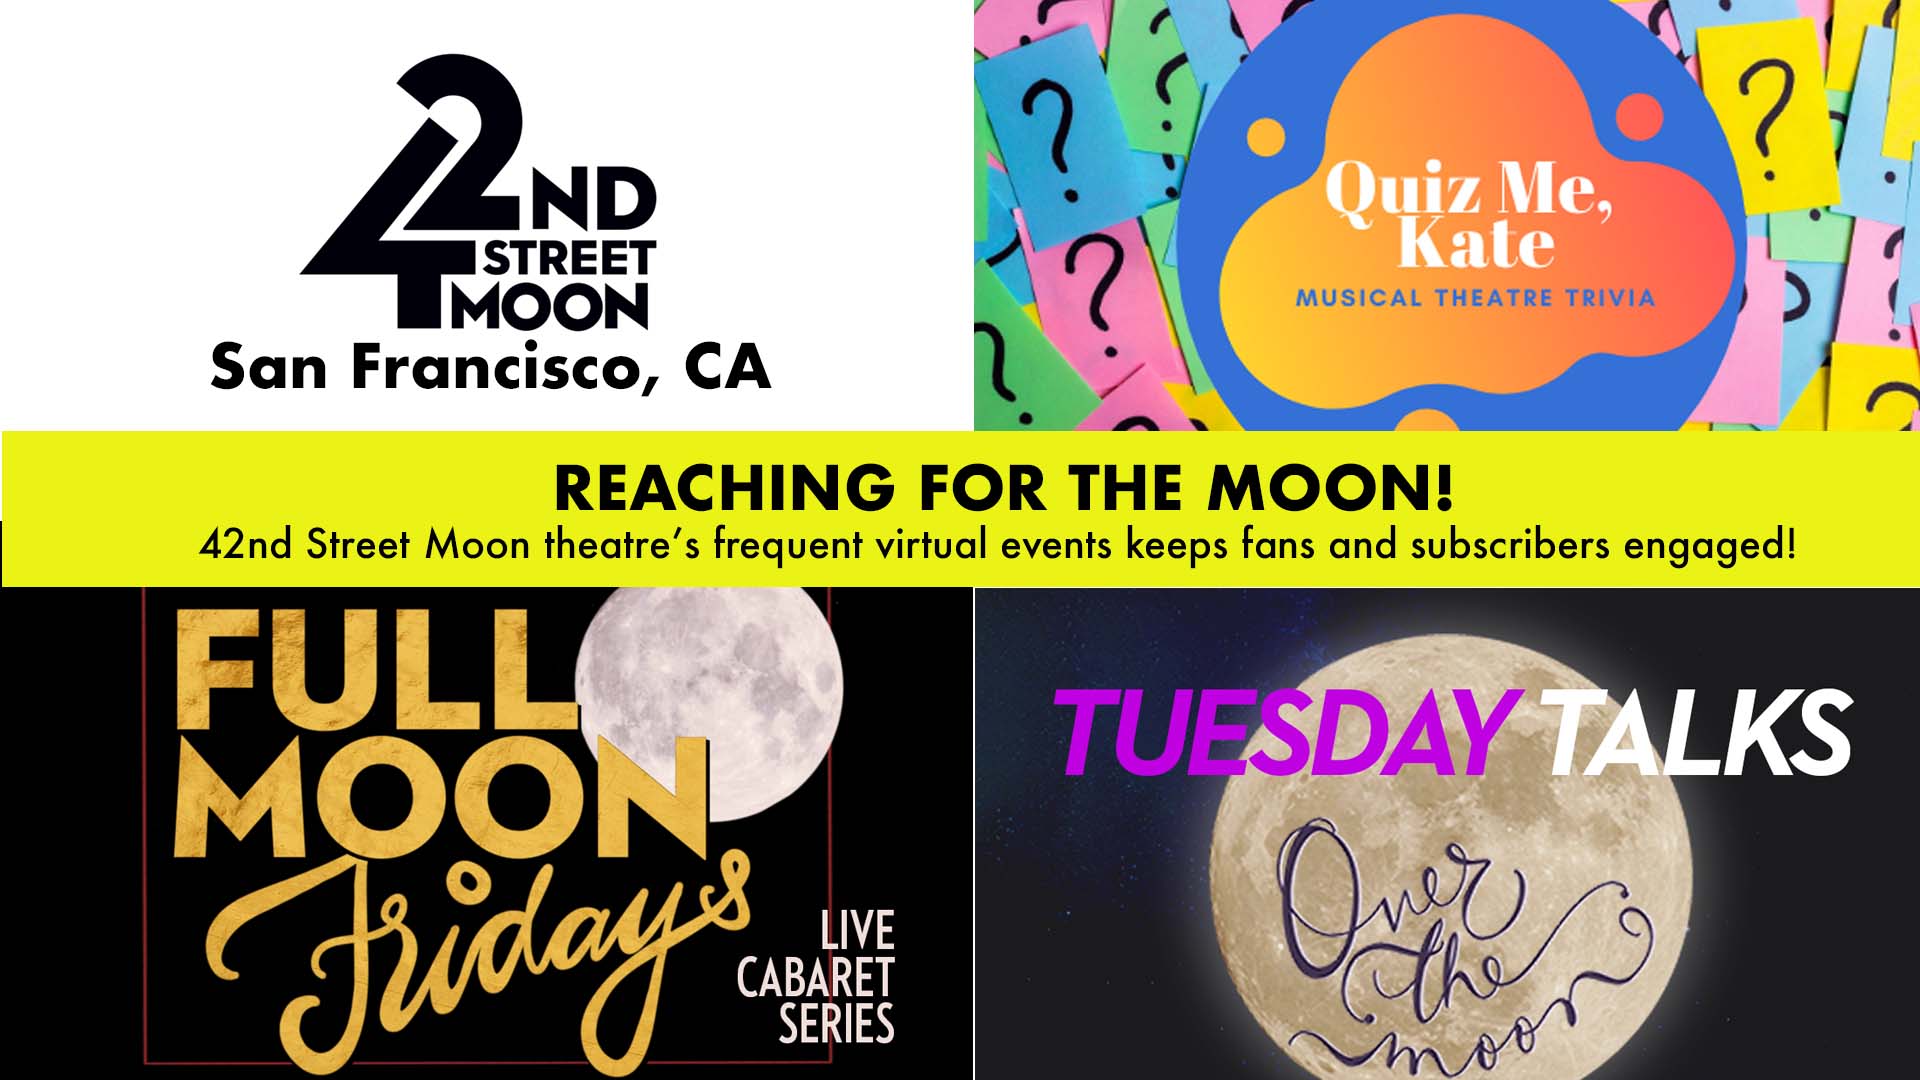 Reaching for the moon! 42nd Street Moon's Virtual Events Keeps Fans Engaged